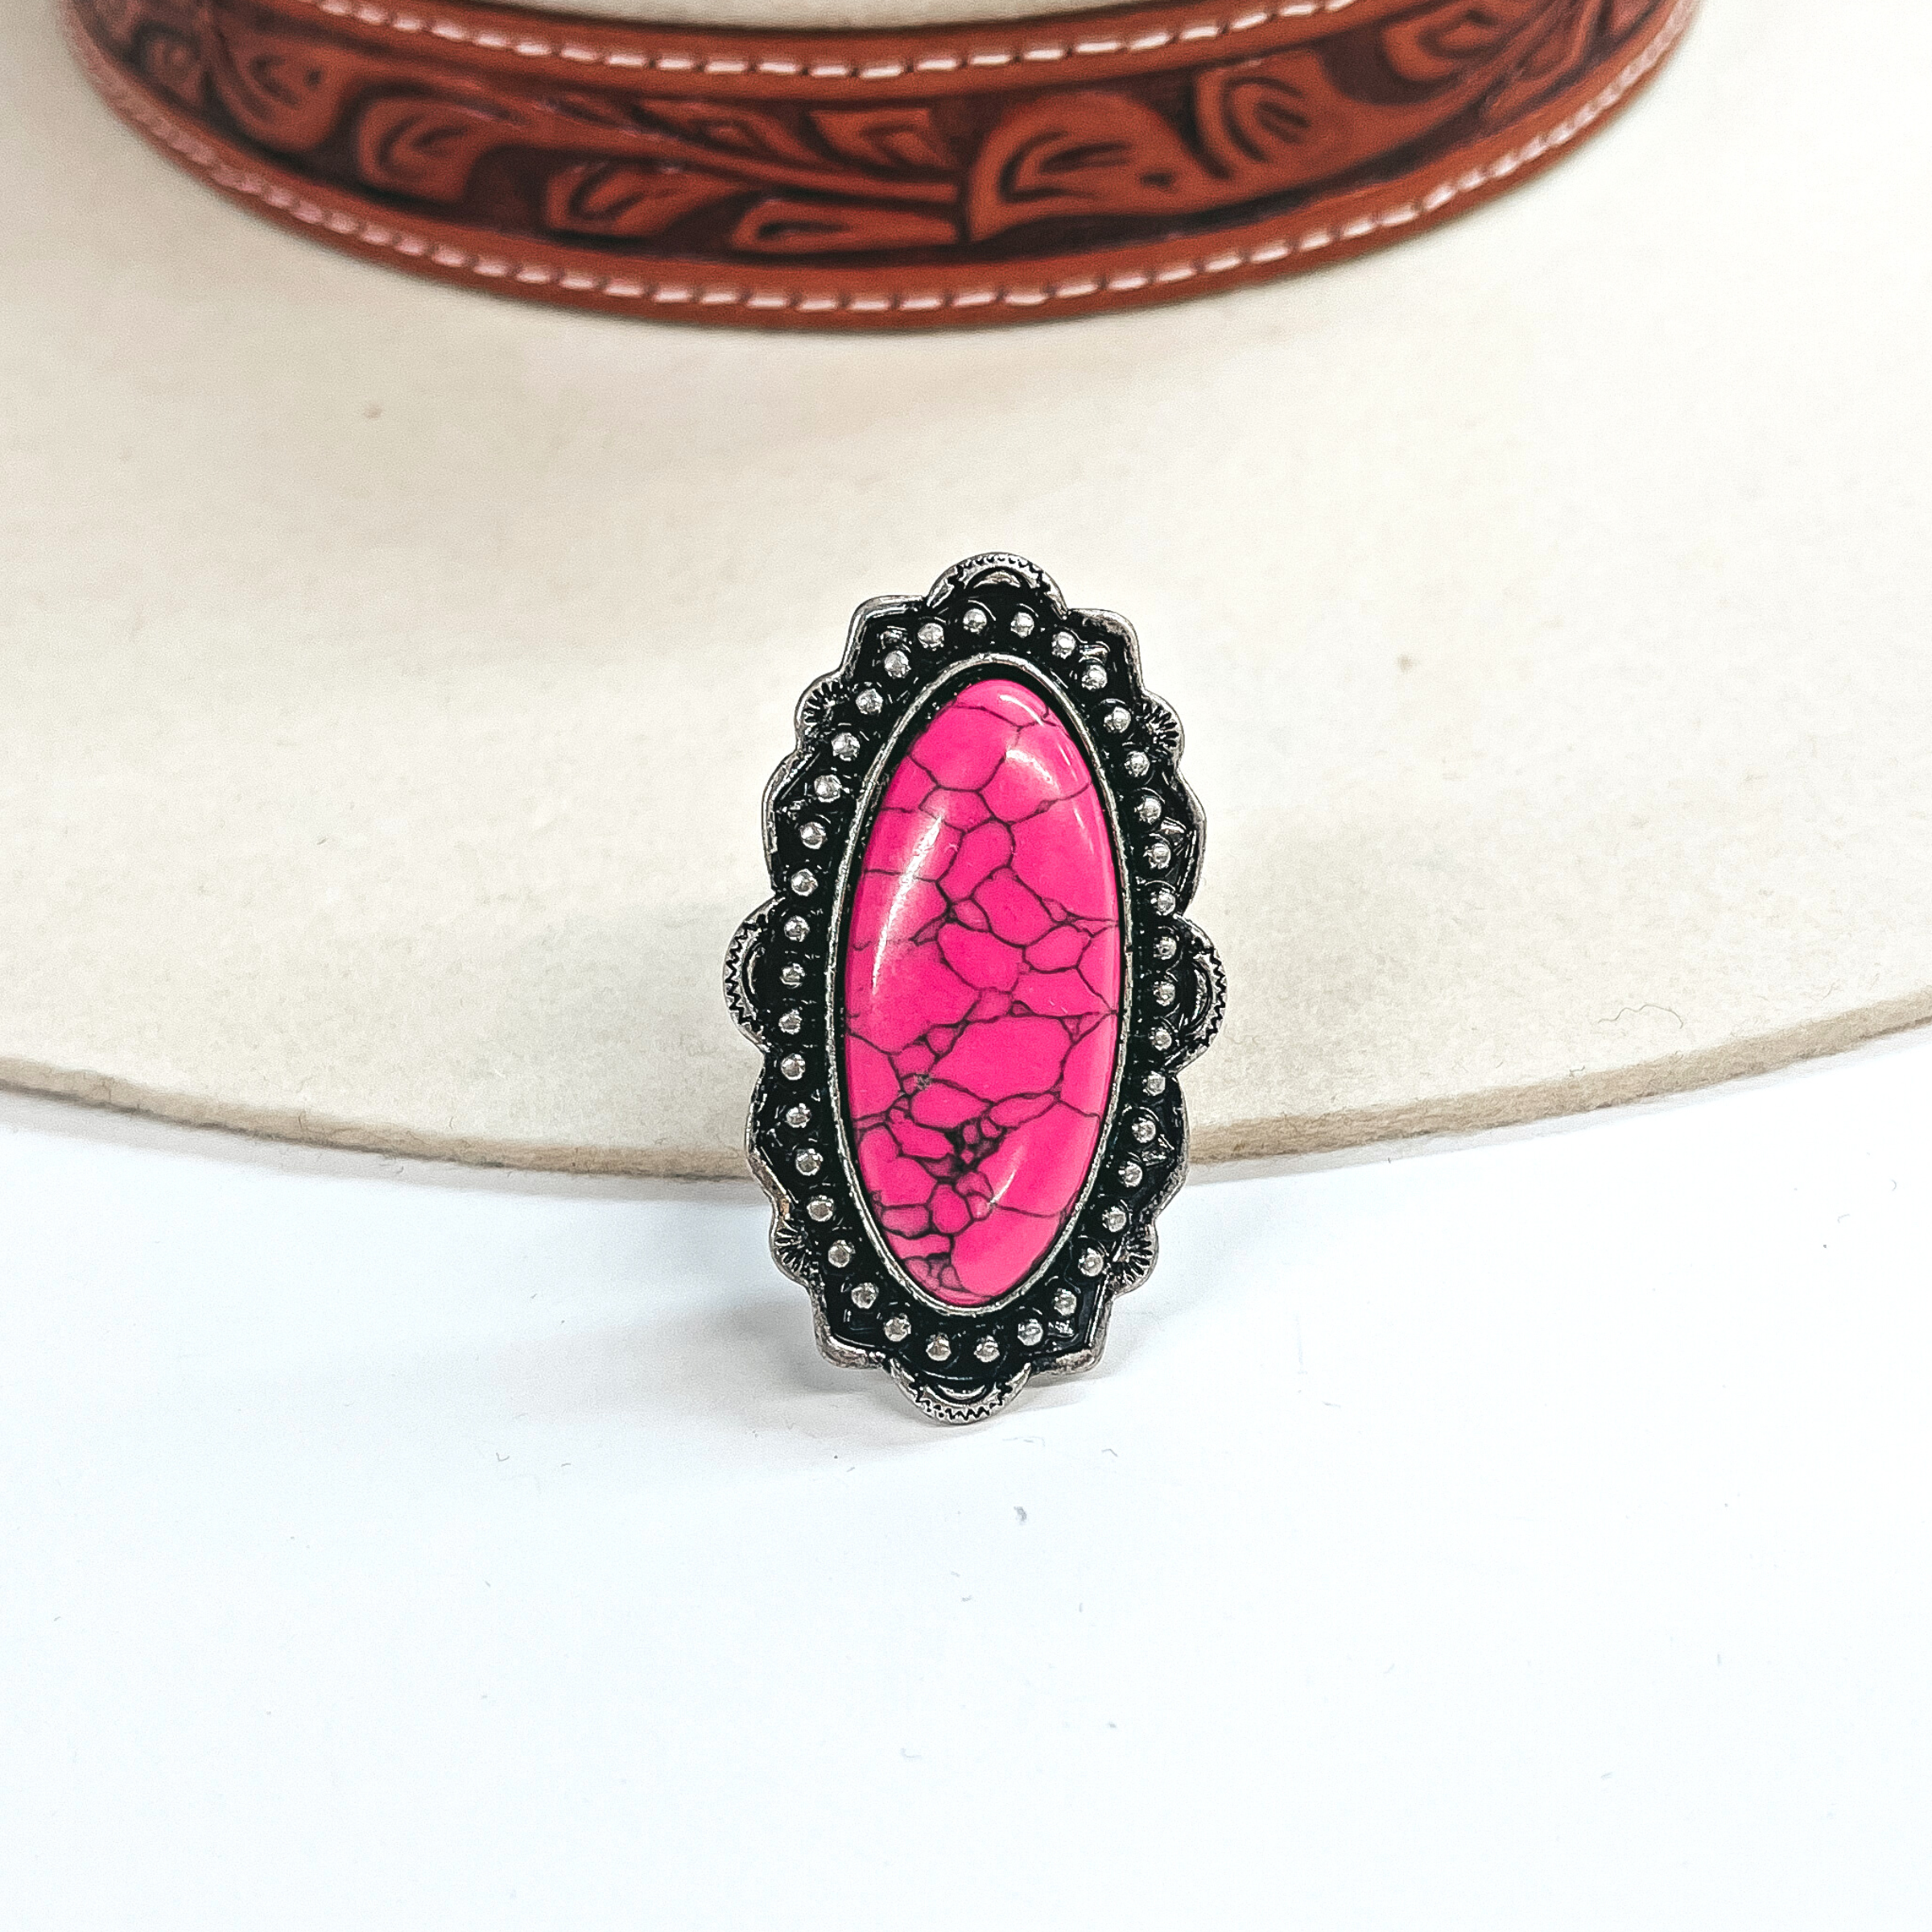 This is a long oval pink stone ring in a silver tone setting. The setting has  rounded bumps with small detailing all around. This ring is taken on an ivory felt hat  with a brown textured band and on a white background.